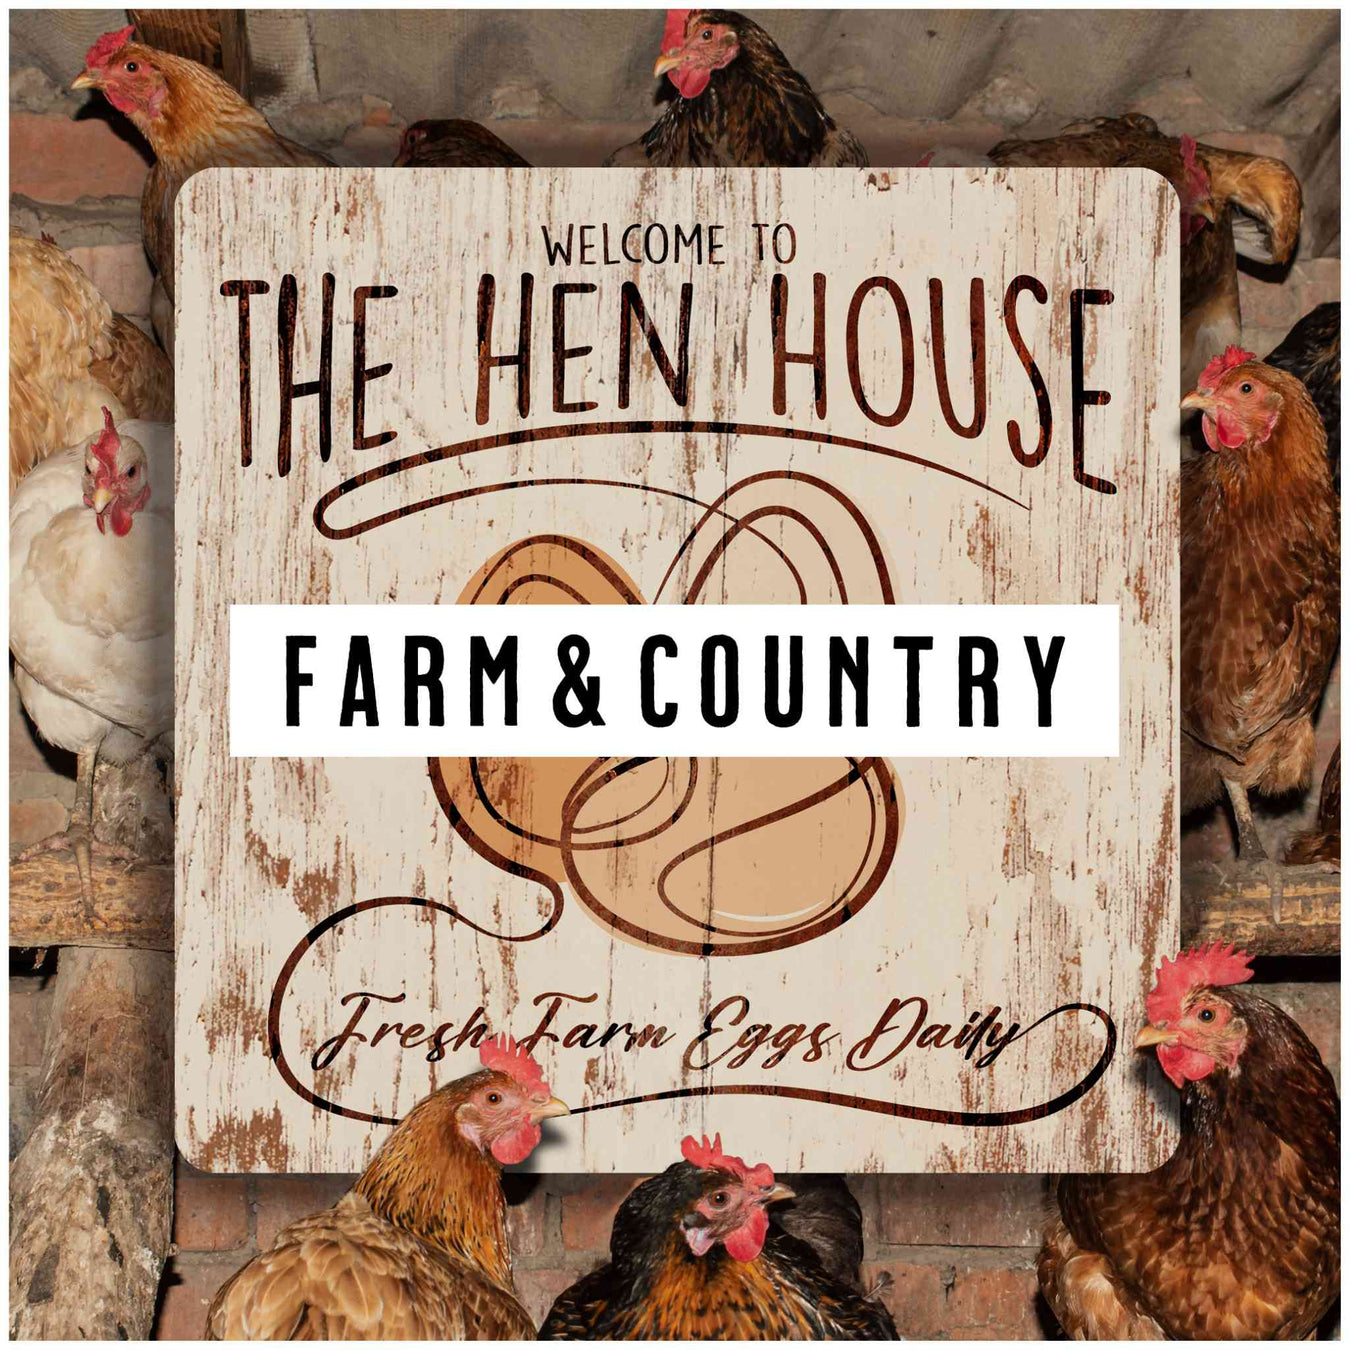 One of Sunshine Corner's Farm and Country Signs, "Hen House" with a banner labeled "Farm & Country" on the top with a dark overlay.